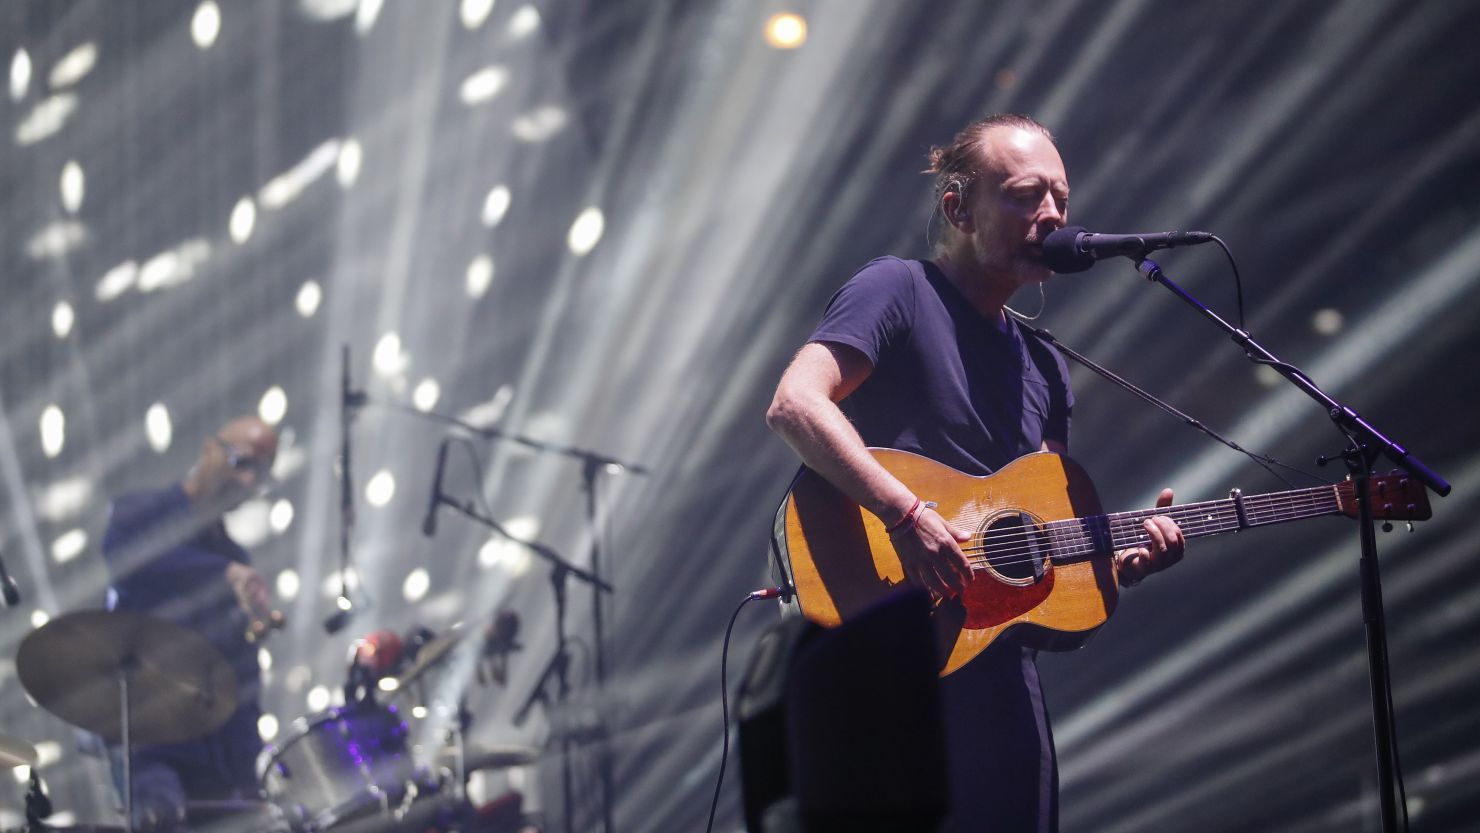 Thom Yorke of the British band Radiohead performs during a summer 2018 North American tour in support of the band's latest album "A Moon Shaped Pool," at the United Center in Chicago. 